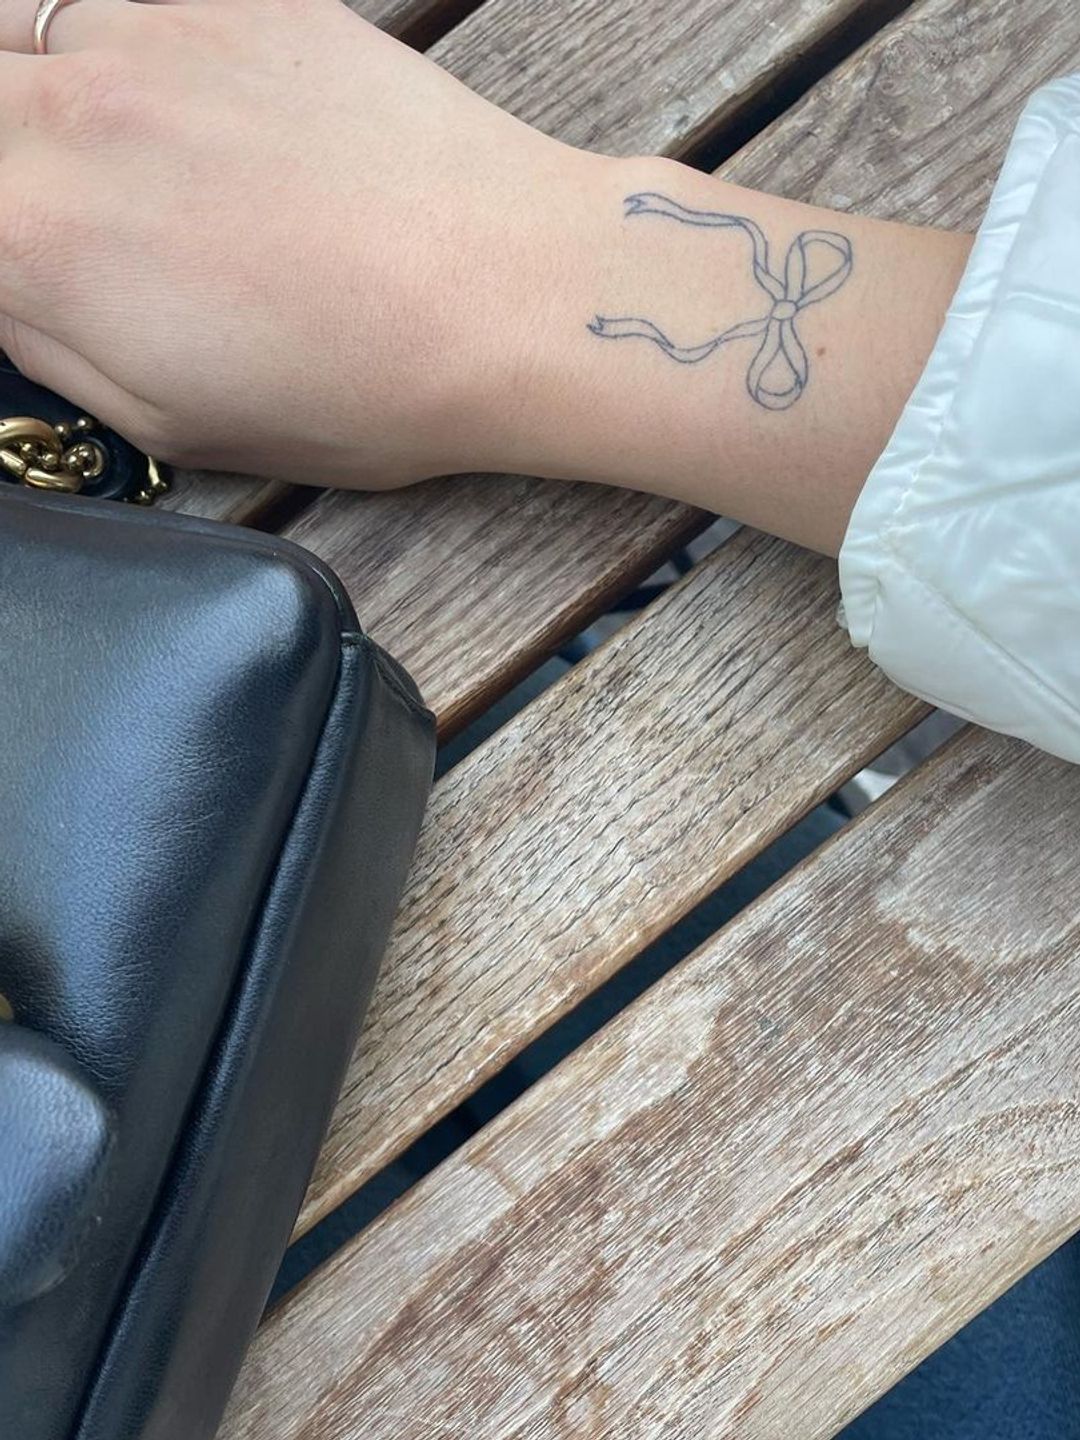 A Complete Guide To Hailey Bieber's Tattoos - Capital